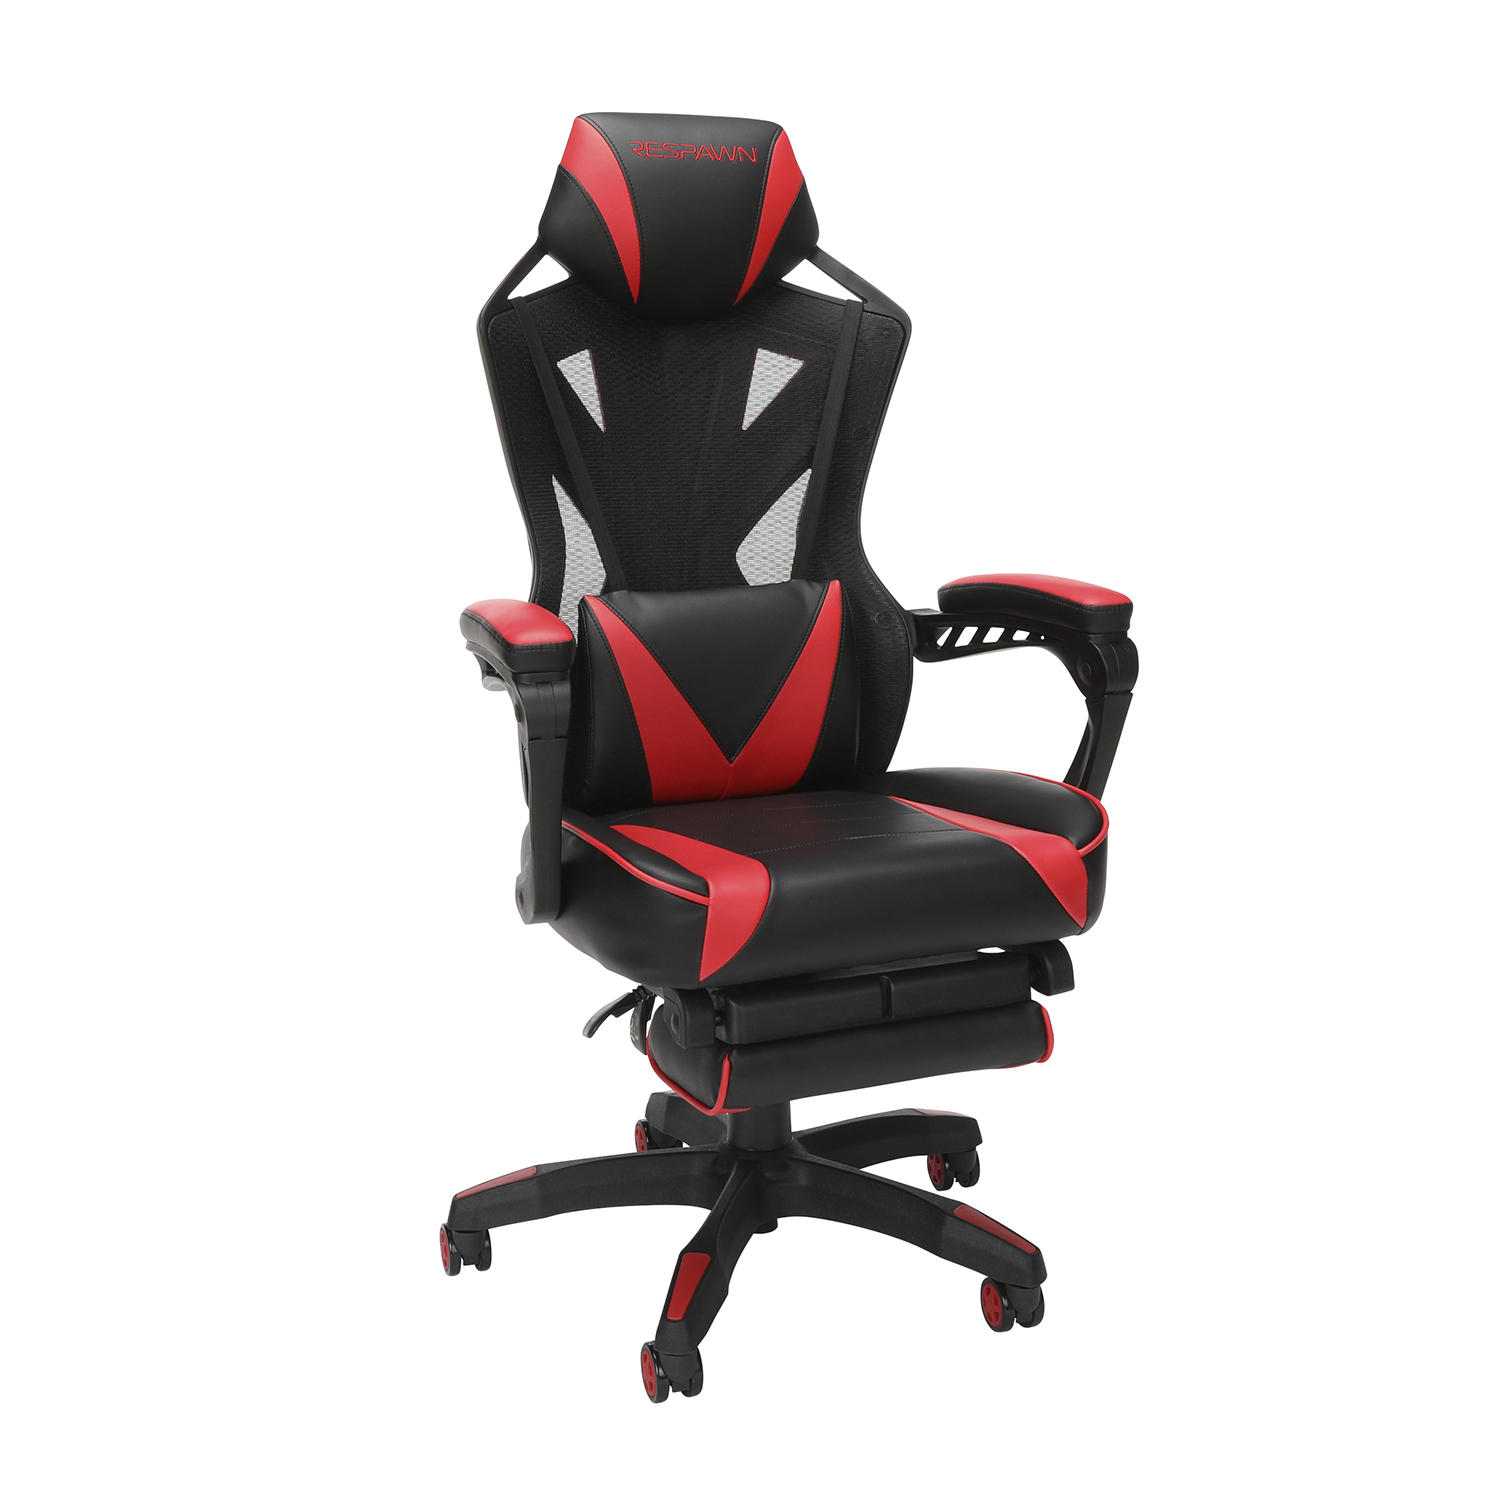 RESPAWN 210 Racing Style Gaming Chair